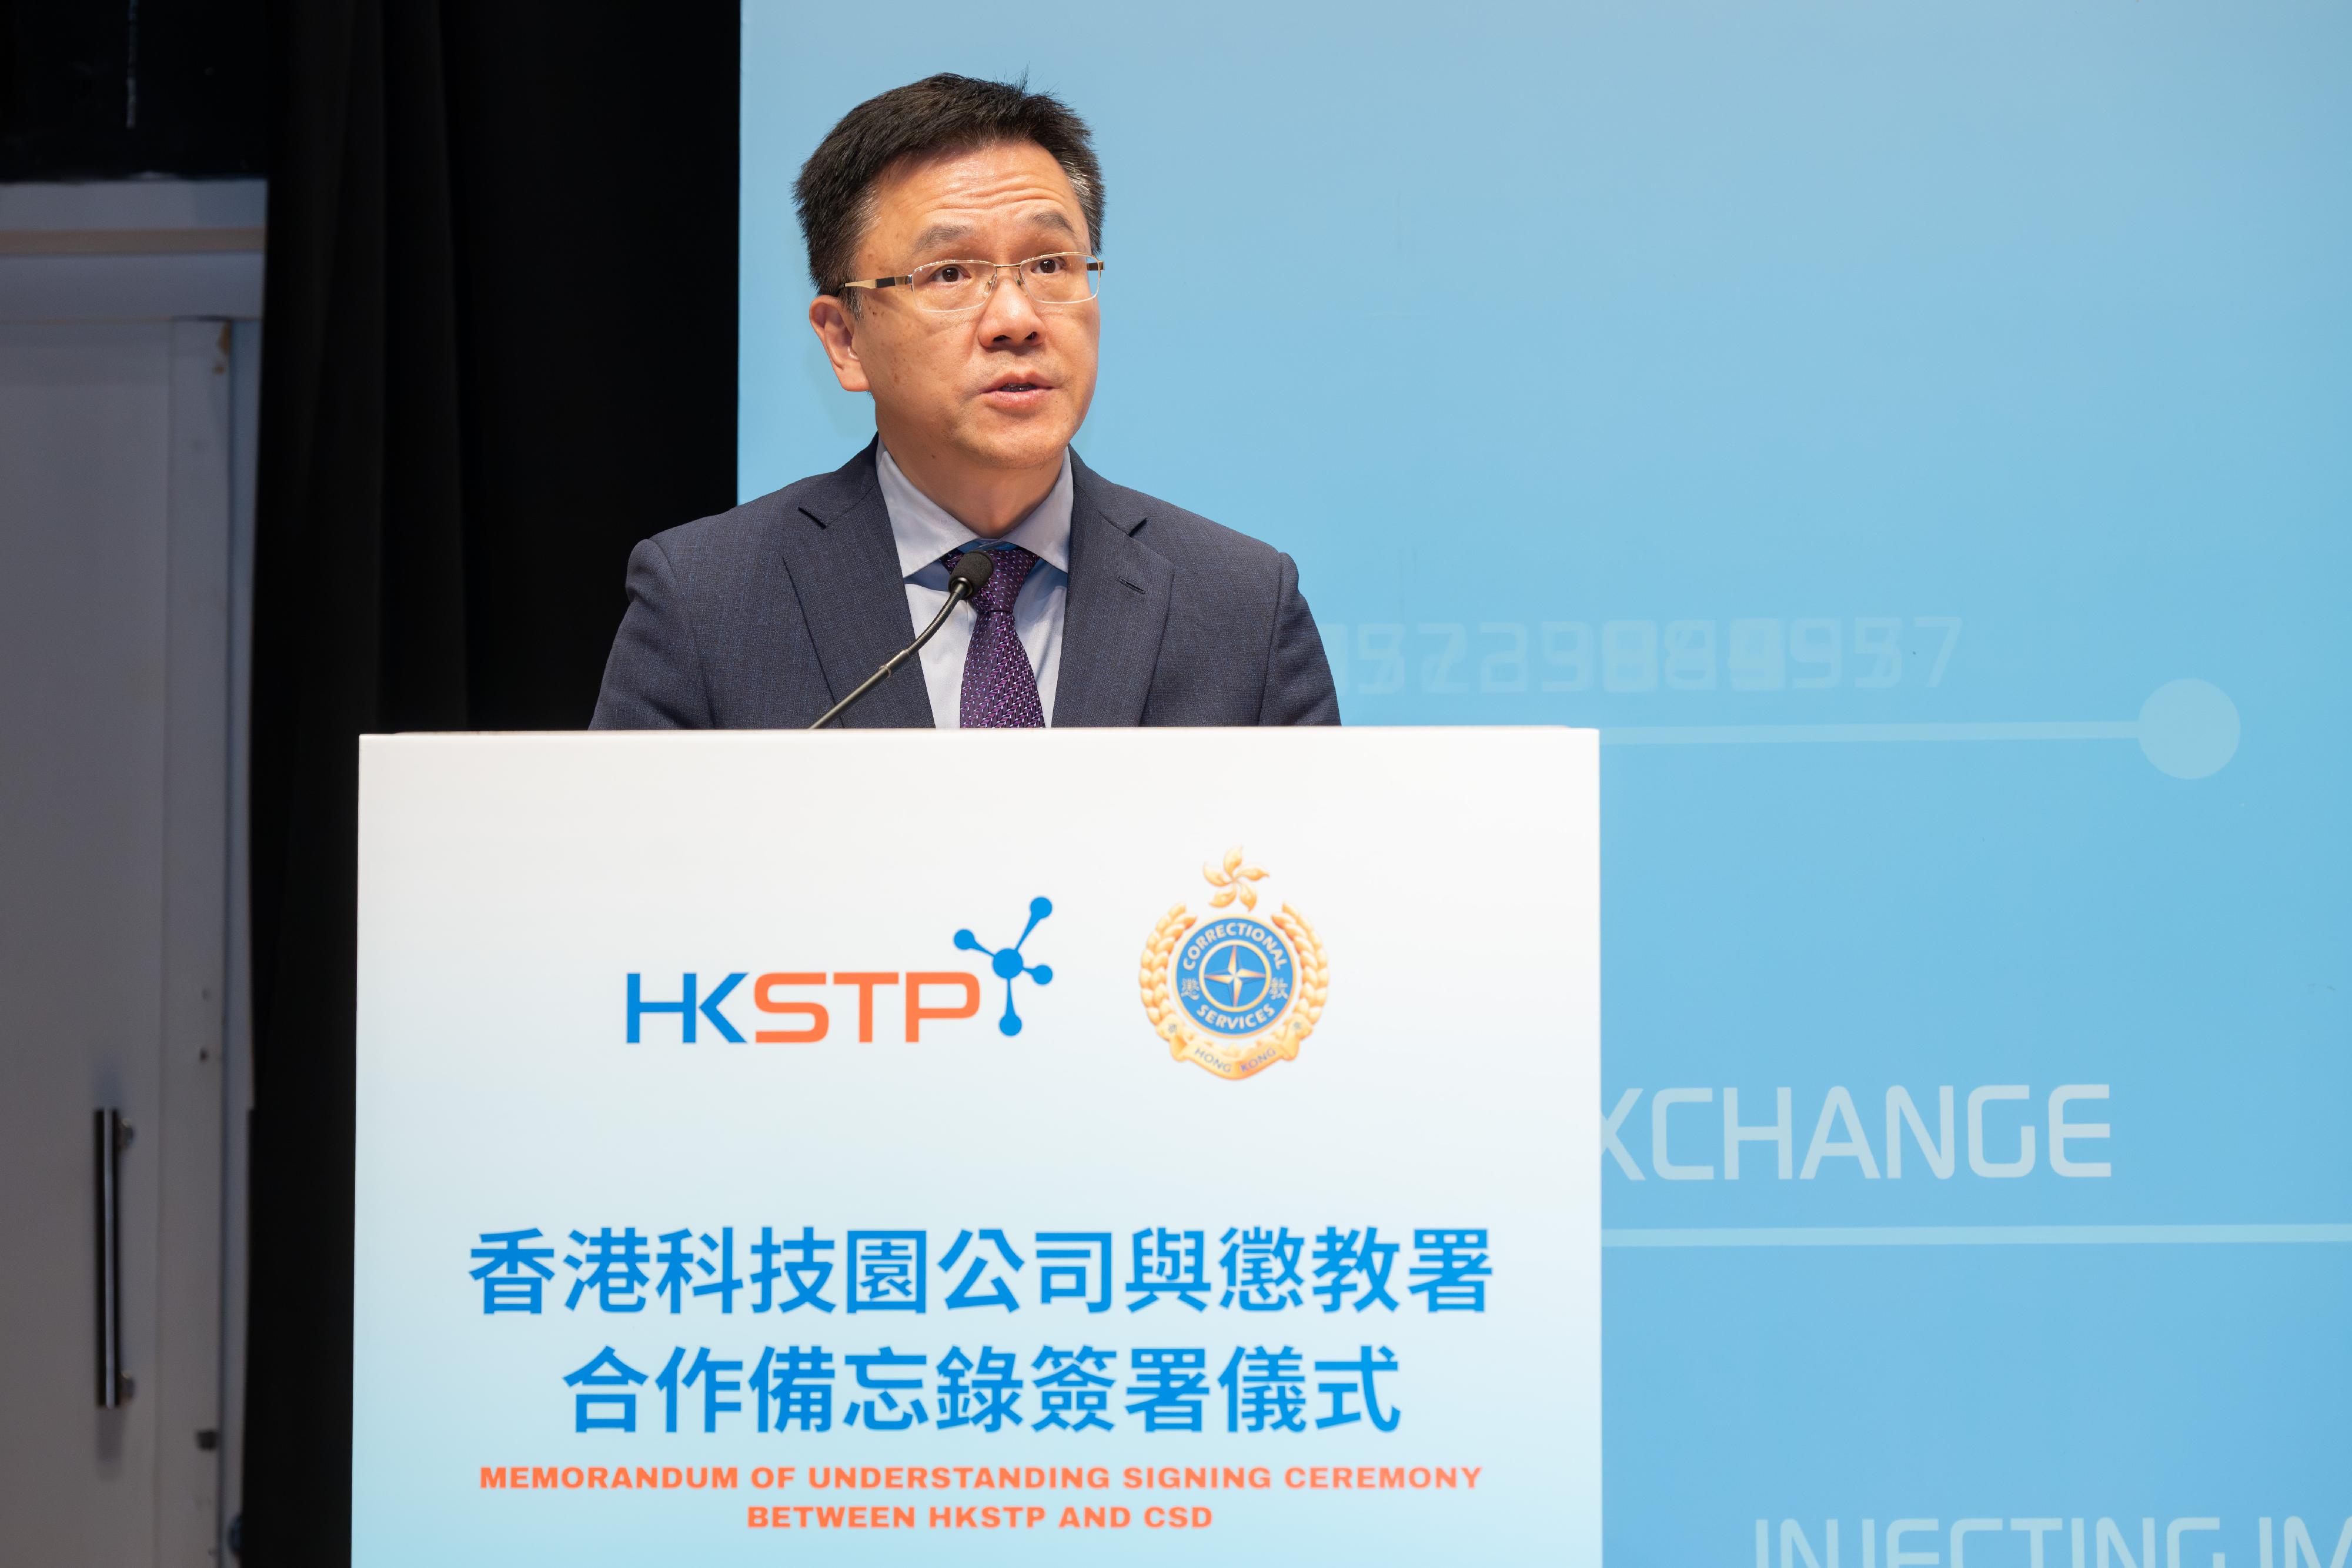 The Correctional Services Department and the Hong Kong Science and Technology Parks Corporation signed a Memorandum of Understanding today (July 11) to deepen their co-operation, which will inject new impetus into the sustainable development of “Smart Prison”. Photo shows the Secretary for Innovation, Technology and Industry, Professor Sun Dong, delivering a speech at the signing ceremony.